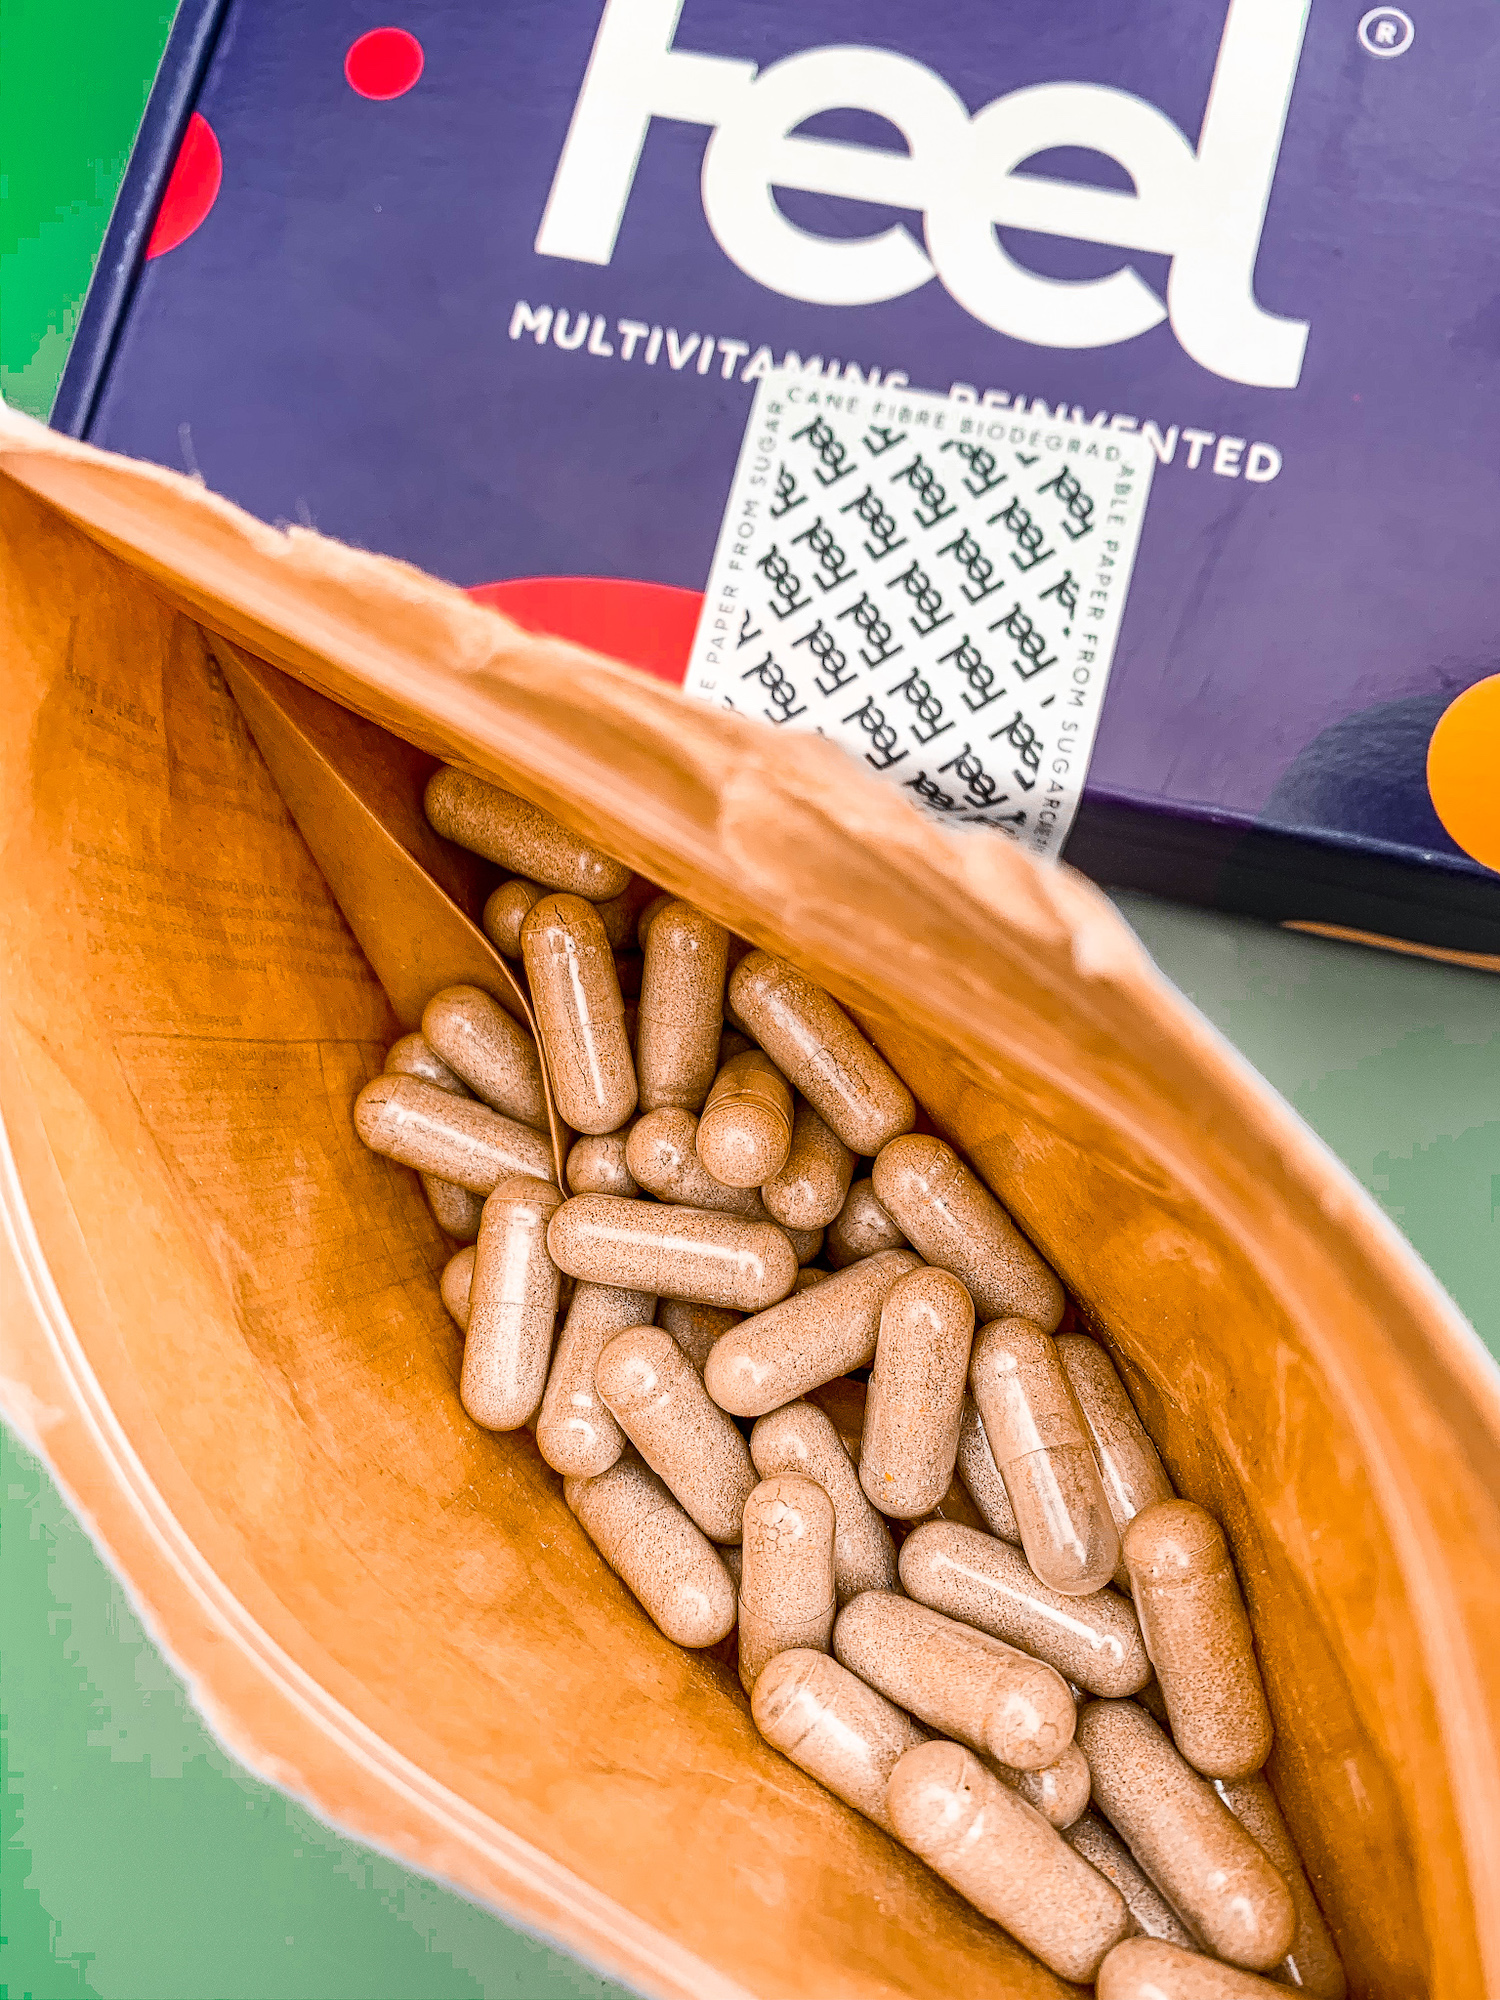 33 Simple Reasons To Add Feel Multivitamins To Your Routine 3